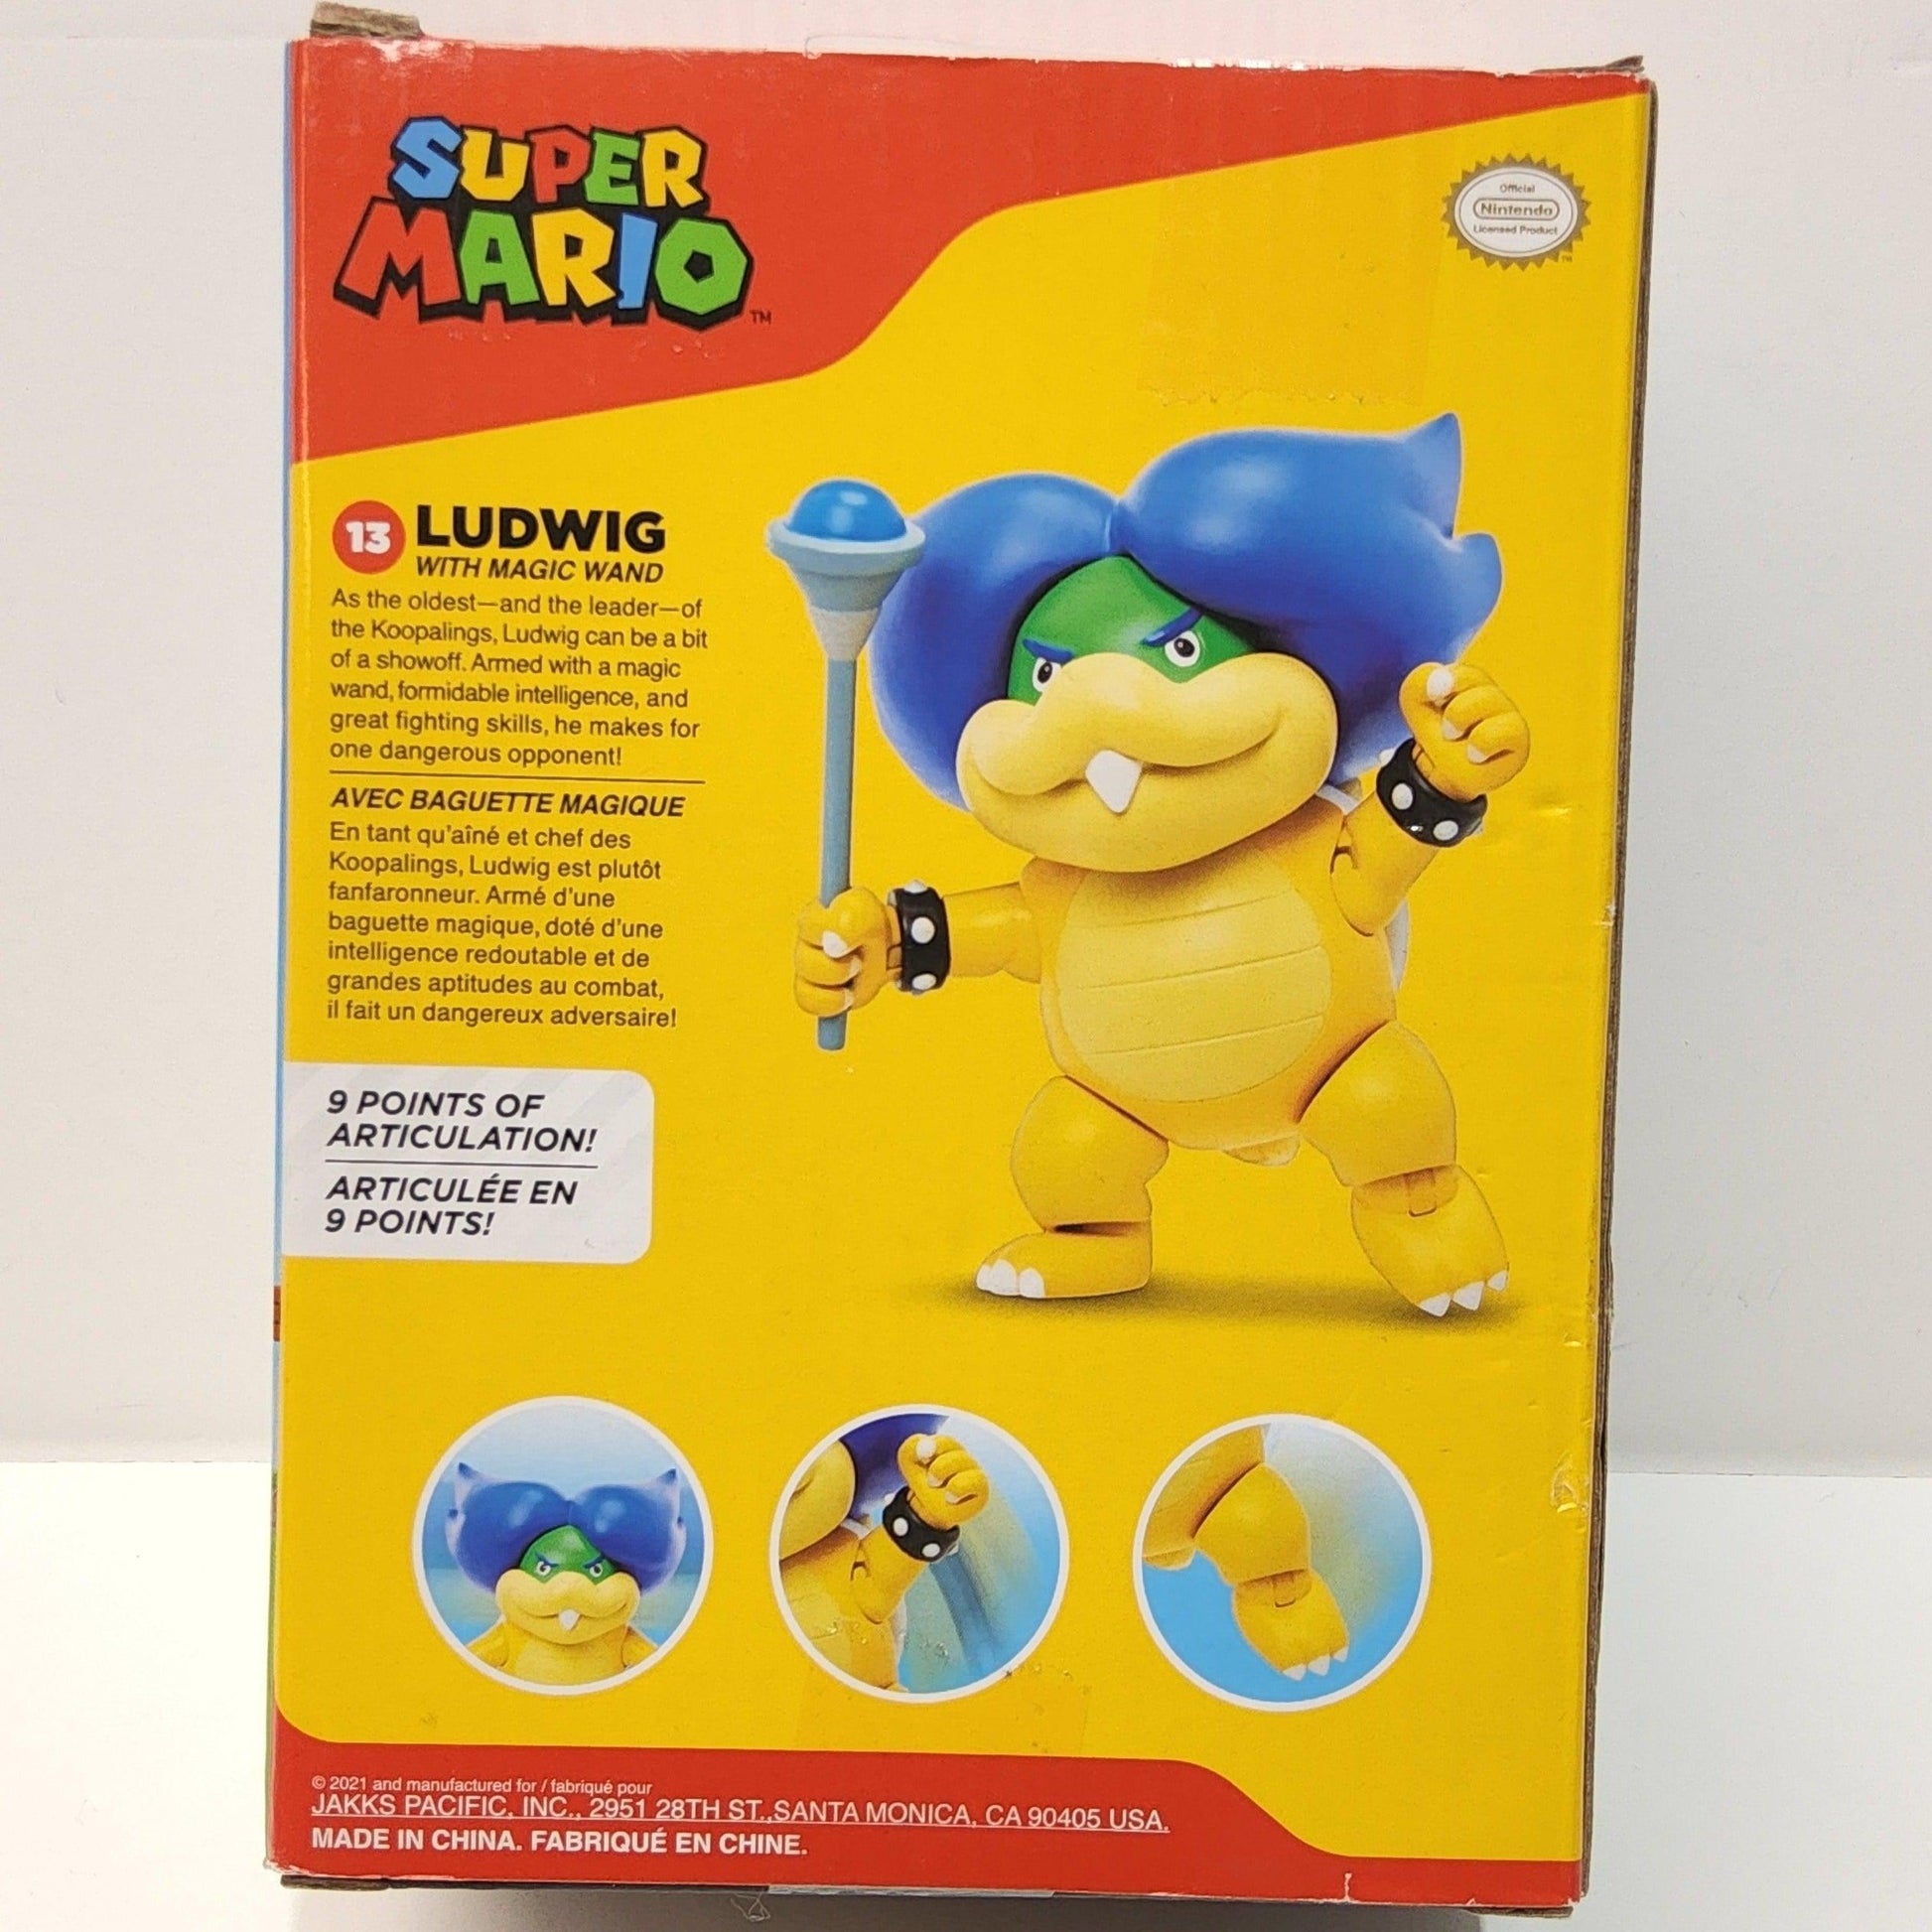 Ludwig Super Mario Brothers Jakks Pacific 4" Action Figure & Magic Wand - Logan's Toy Chest